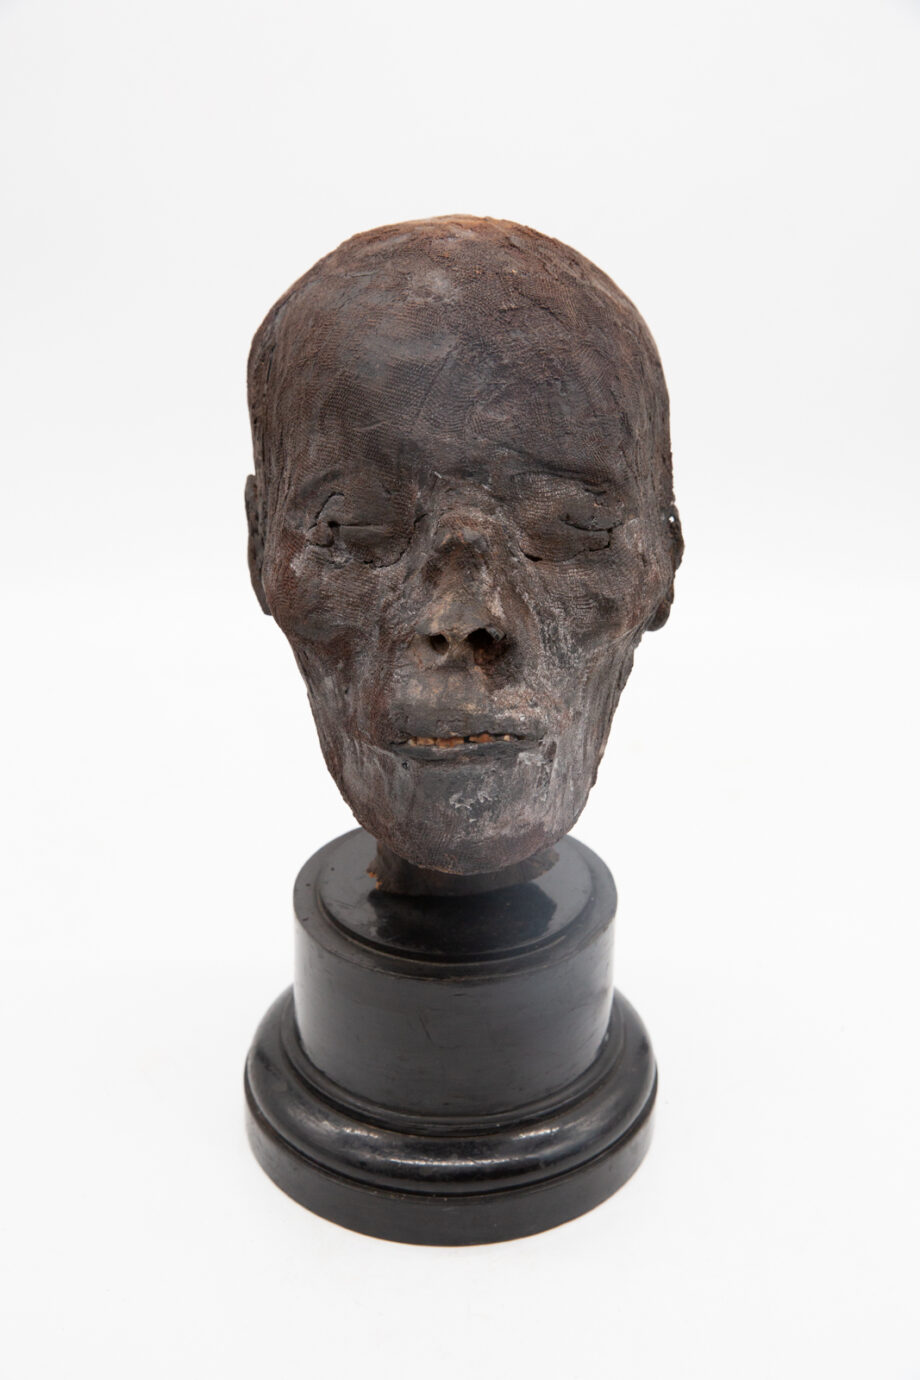 Ancient mummy head on pedestal with white background